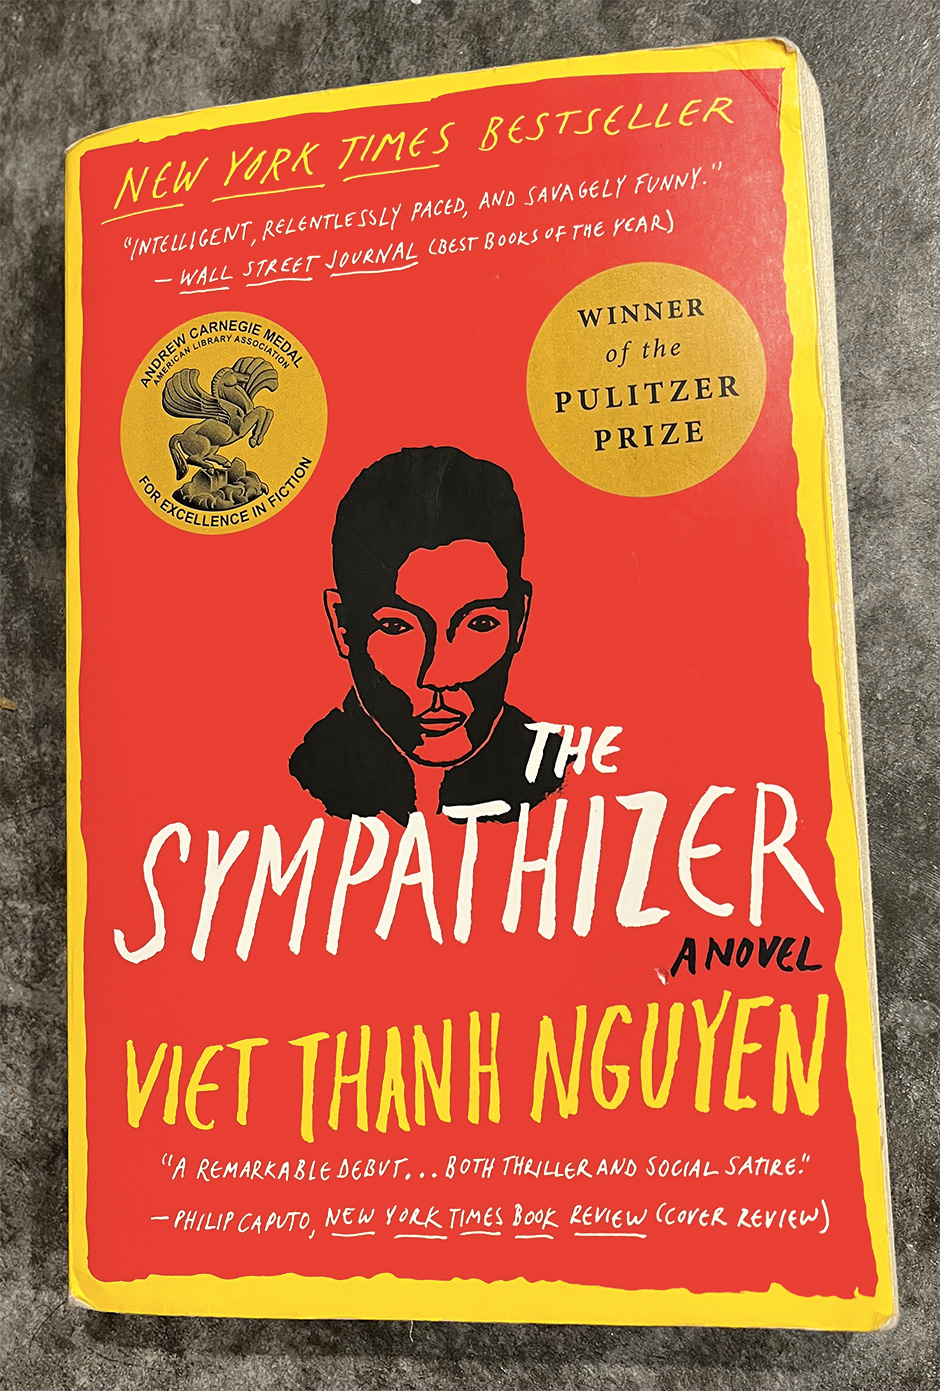 The Sympathiser by Viet Thanh Nguyen is Rowan Zorilla's book choice